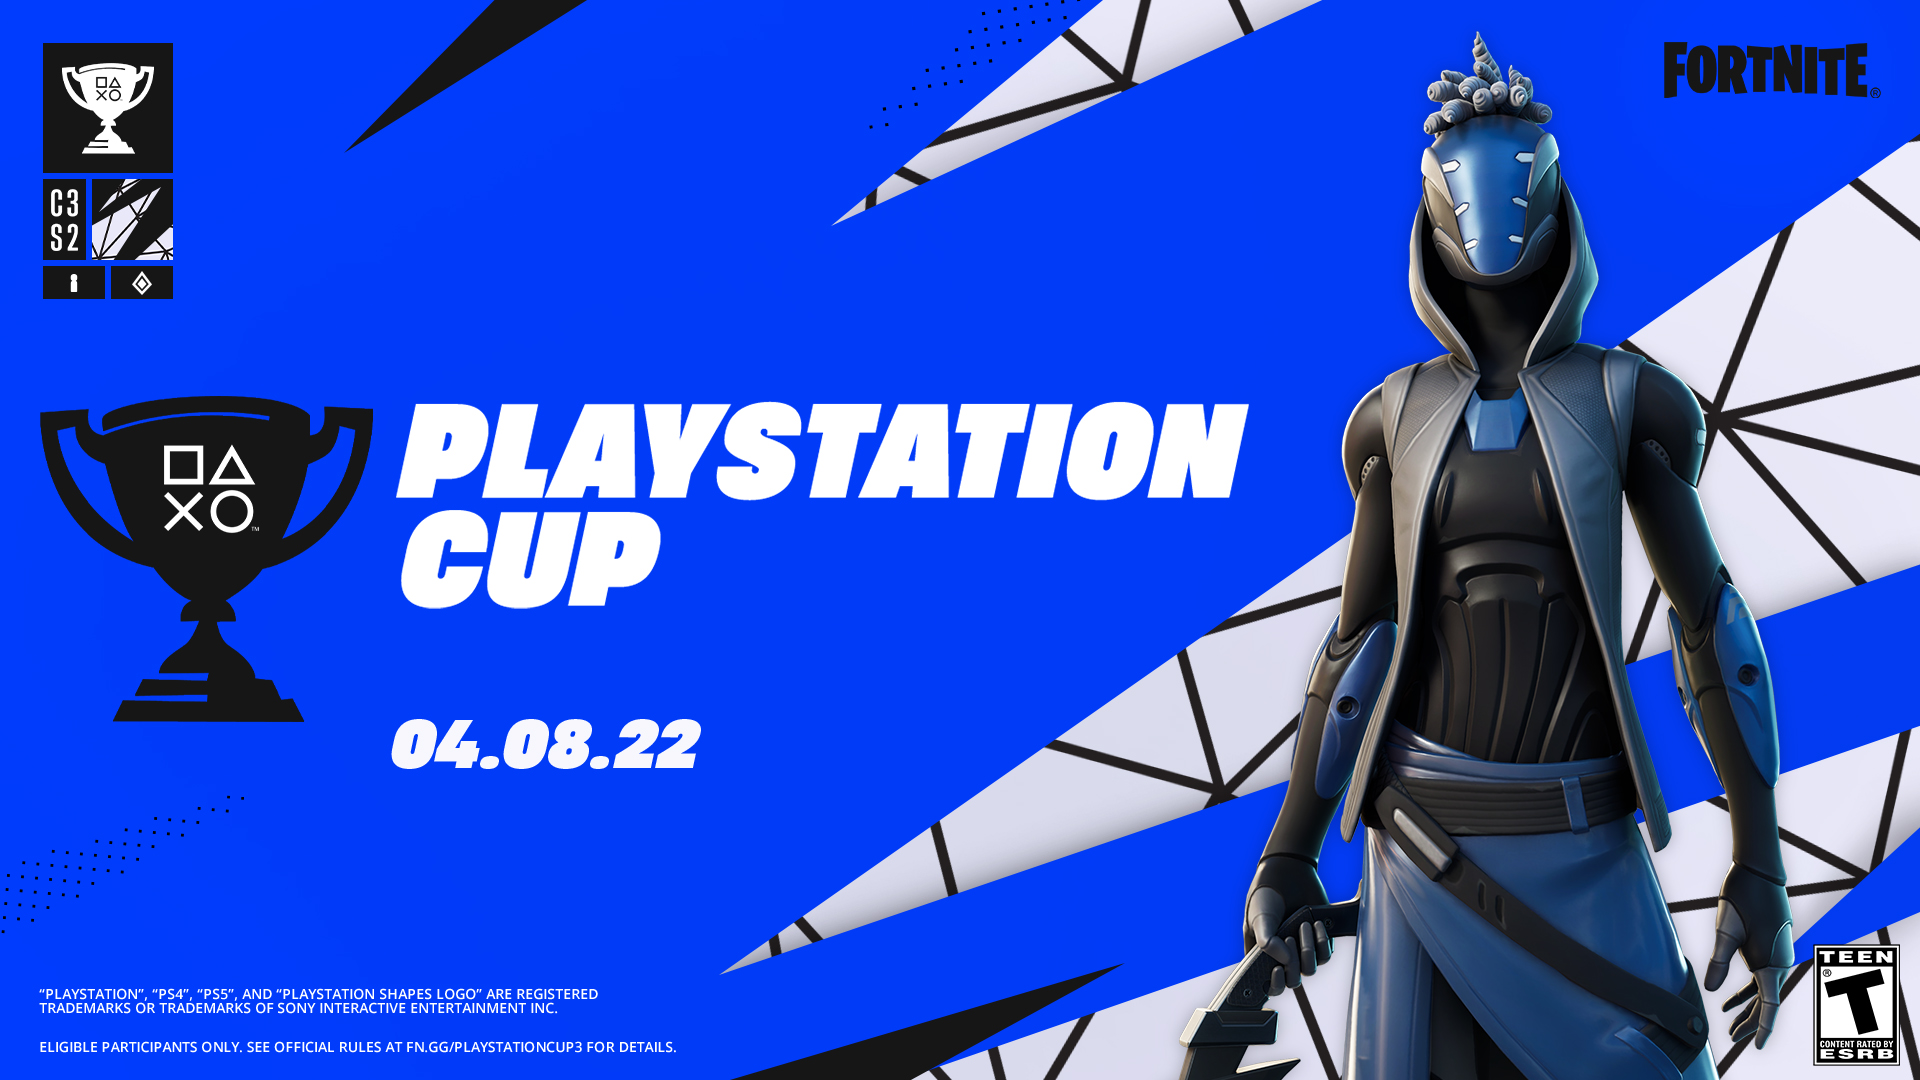 PlayStation on Twitter: "🪂April's Fortnite Cup dropping a new challenge: Zero 🏠 designed to test your skills. Sign up today so you don't miss out the competition: https://t.co/rXDxRpoXCK https://t.co/jRMcdpyYxf" /